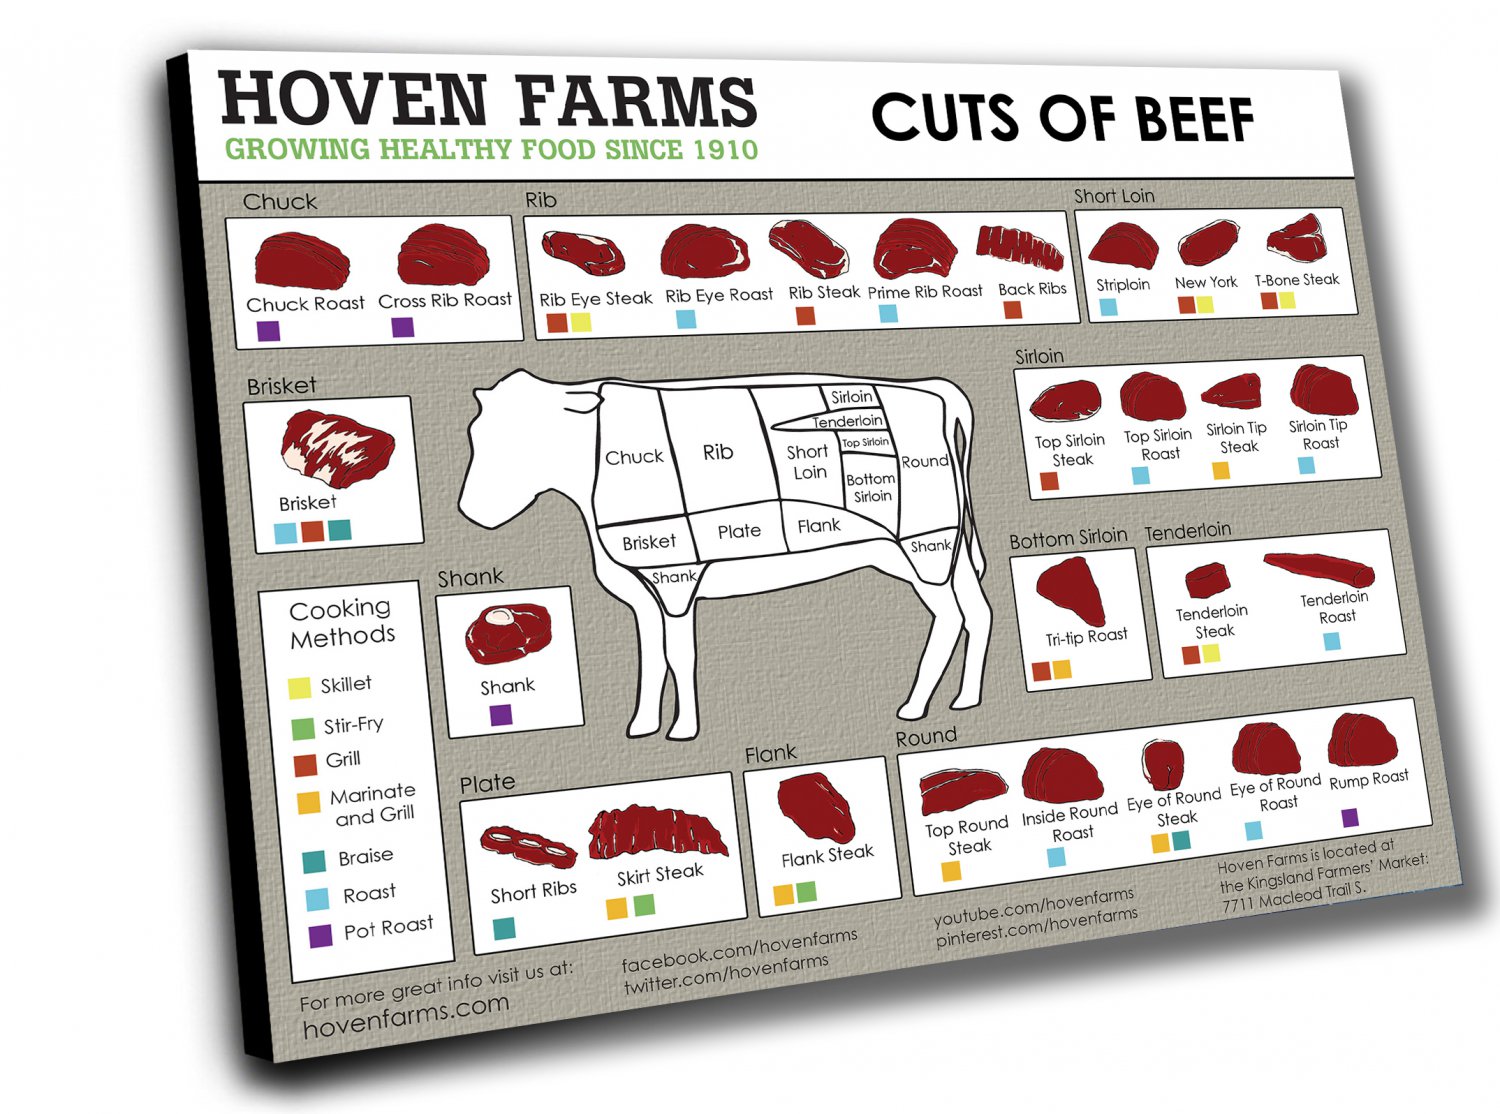 Hoven Farms Cuts of Beef Chart 14"x20" (35cm/51cm) Canvas Print